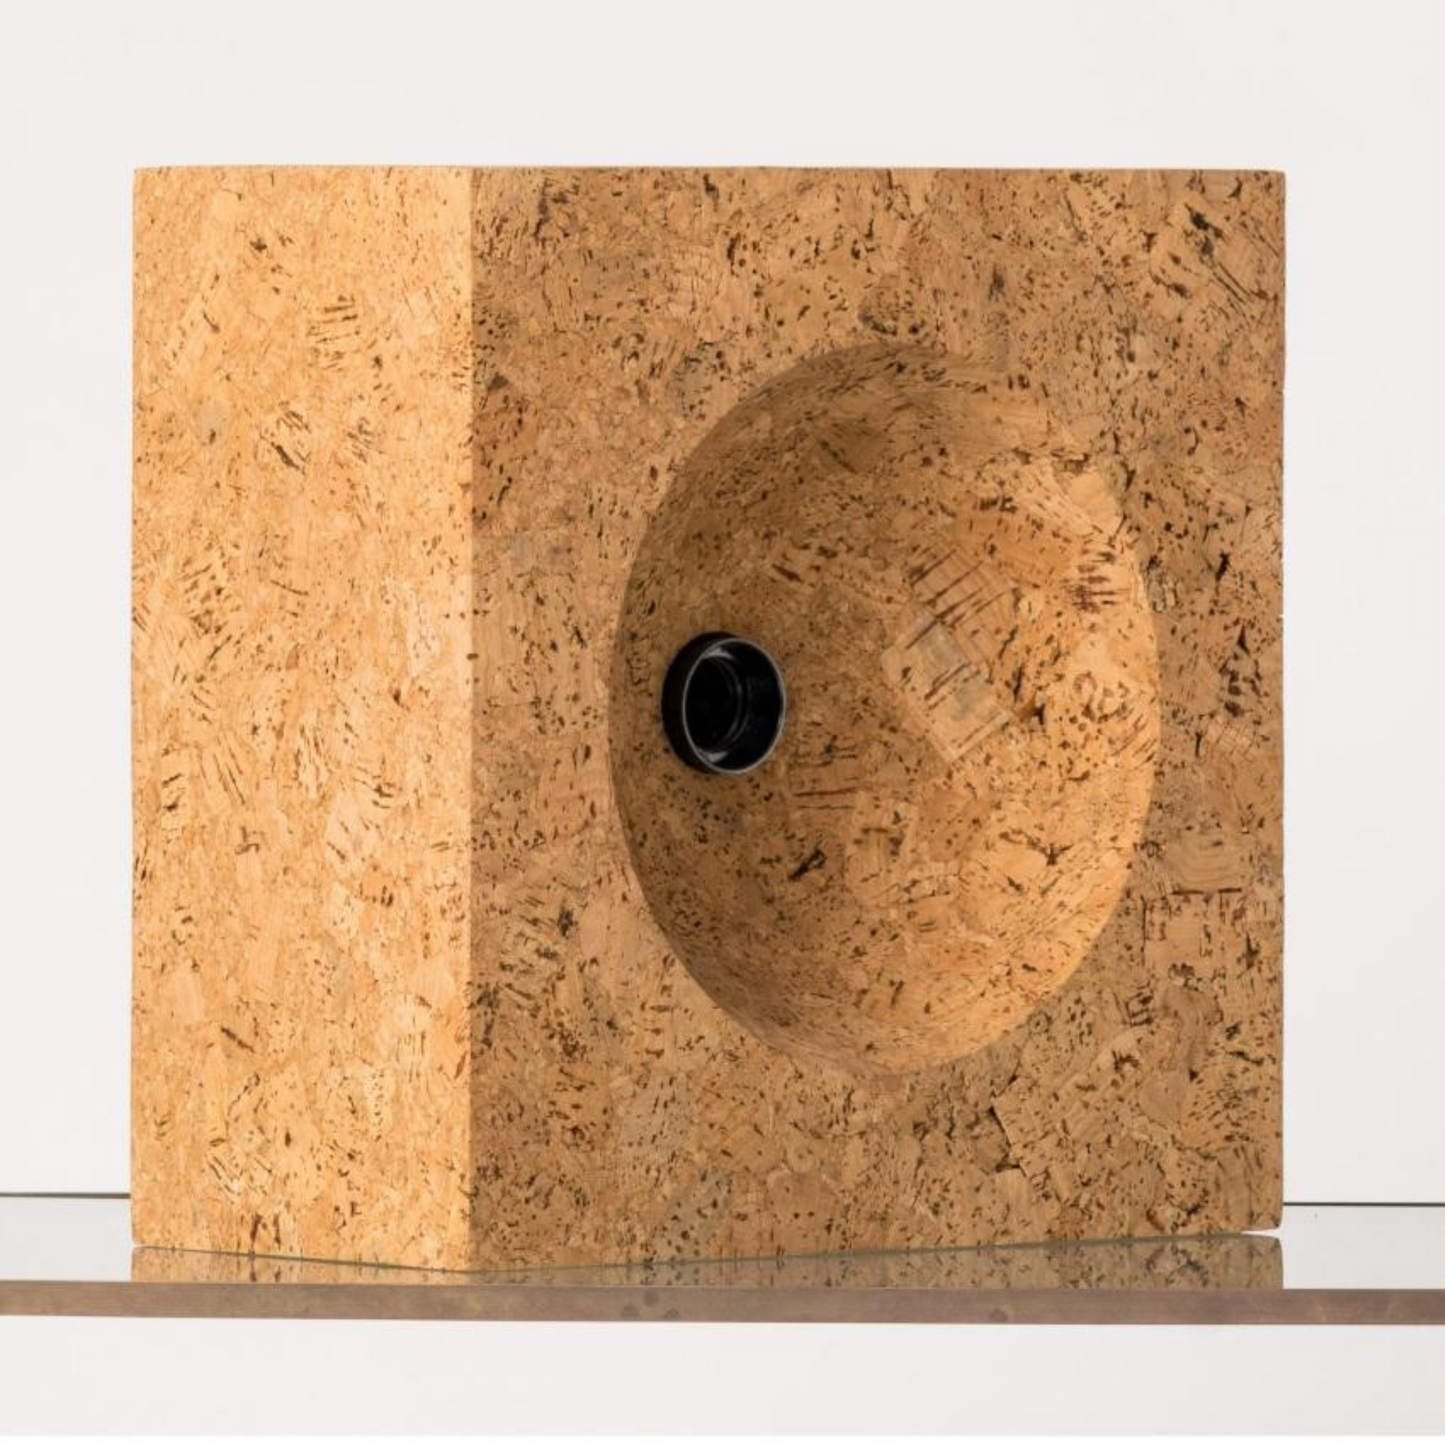 "Braga" Solid Cork Wall Light or Table Lamp by Facto Atelier Paris